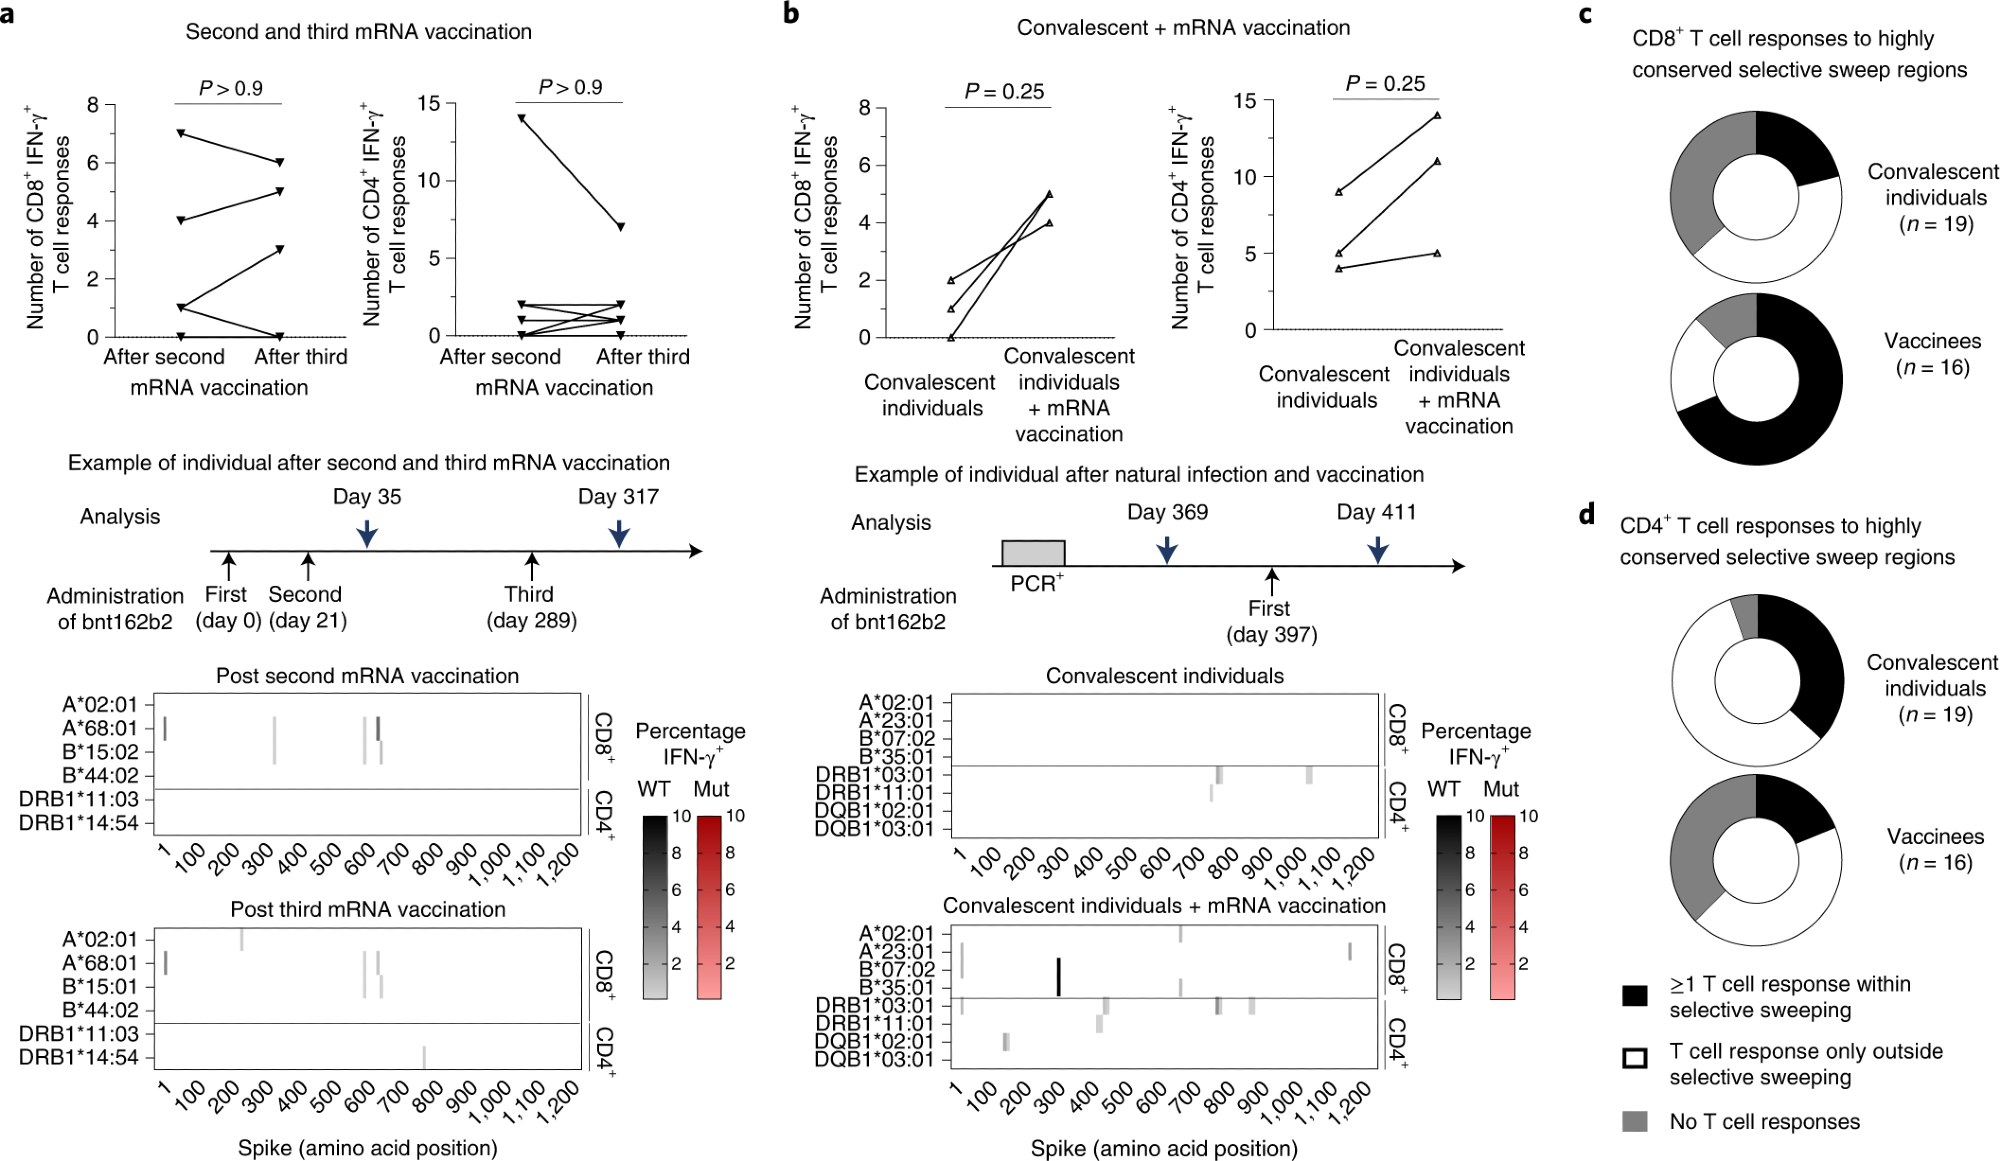 a,b, Number, location and percentages of spike-specific CD8+ and CD4+ T-cell responses to OLPs that are detectable in SARS-CoV-2 vaccinees after the second versus after the third dose of Pfizer/BioNTech mRNA vaccine (bnt162b2, measured 2–4 weeks after vaccination) (a) and in SARS-CoV-2 convalescent individuals who subsequently received a single dose of Pfizer/BioNTech mRNA boost vaccination (bnt162b2, measured 2 weeks after vaccination) (b). The heatmaps depict the data of one representative individual each. Targeted epitopes with sequence variations in Omicron/B.1.1.529, BA.1 are marked in red. c,d, Vaccinees and convalescent individuals with CD8+ (c) and CD4+ (d) T-cell responses within and outside highly conserved selective sweep regions in the spike protein are shown. Statistical analysis was performed with a two-sided Wilcoxon matched-pairs signed-rank test.